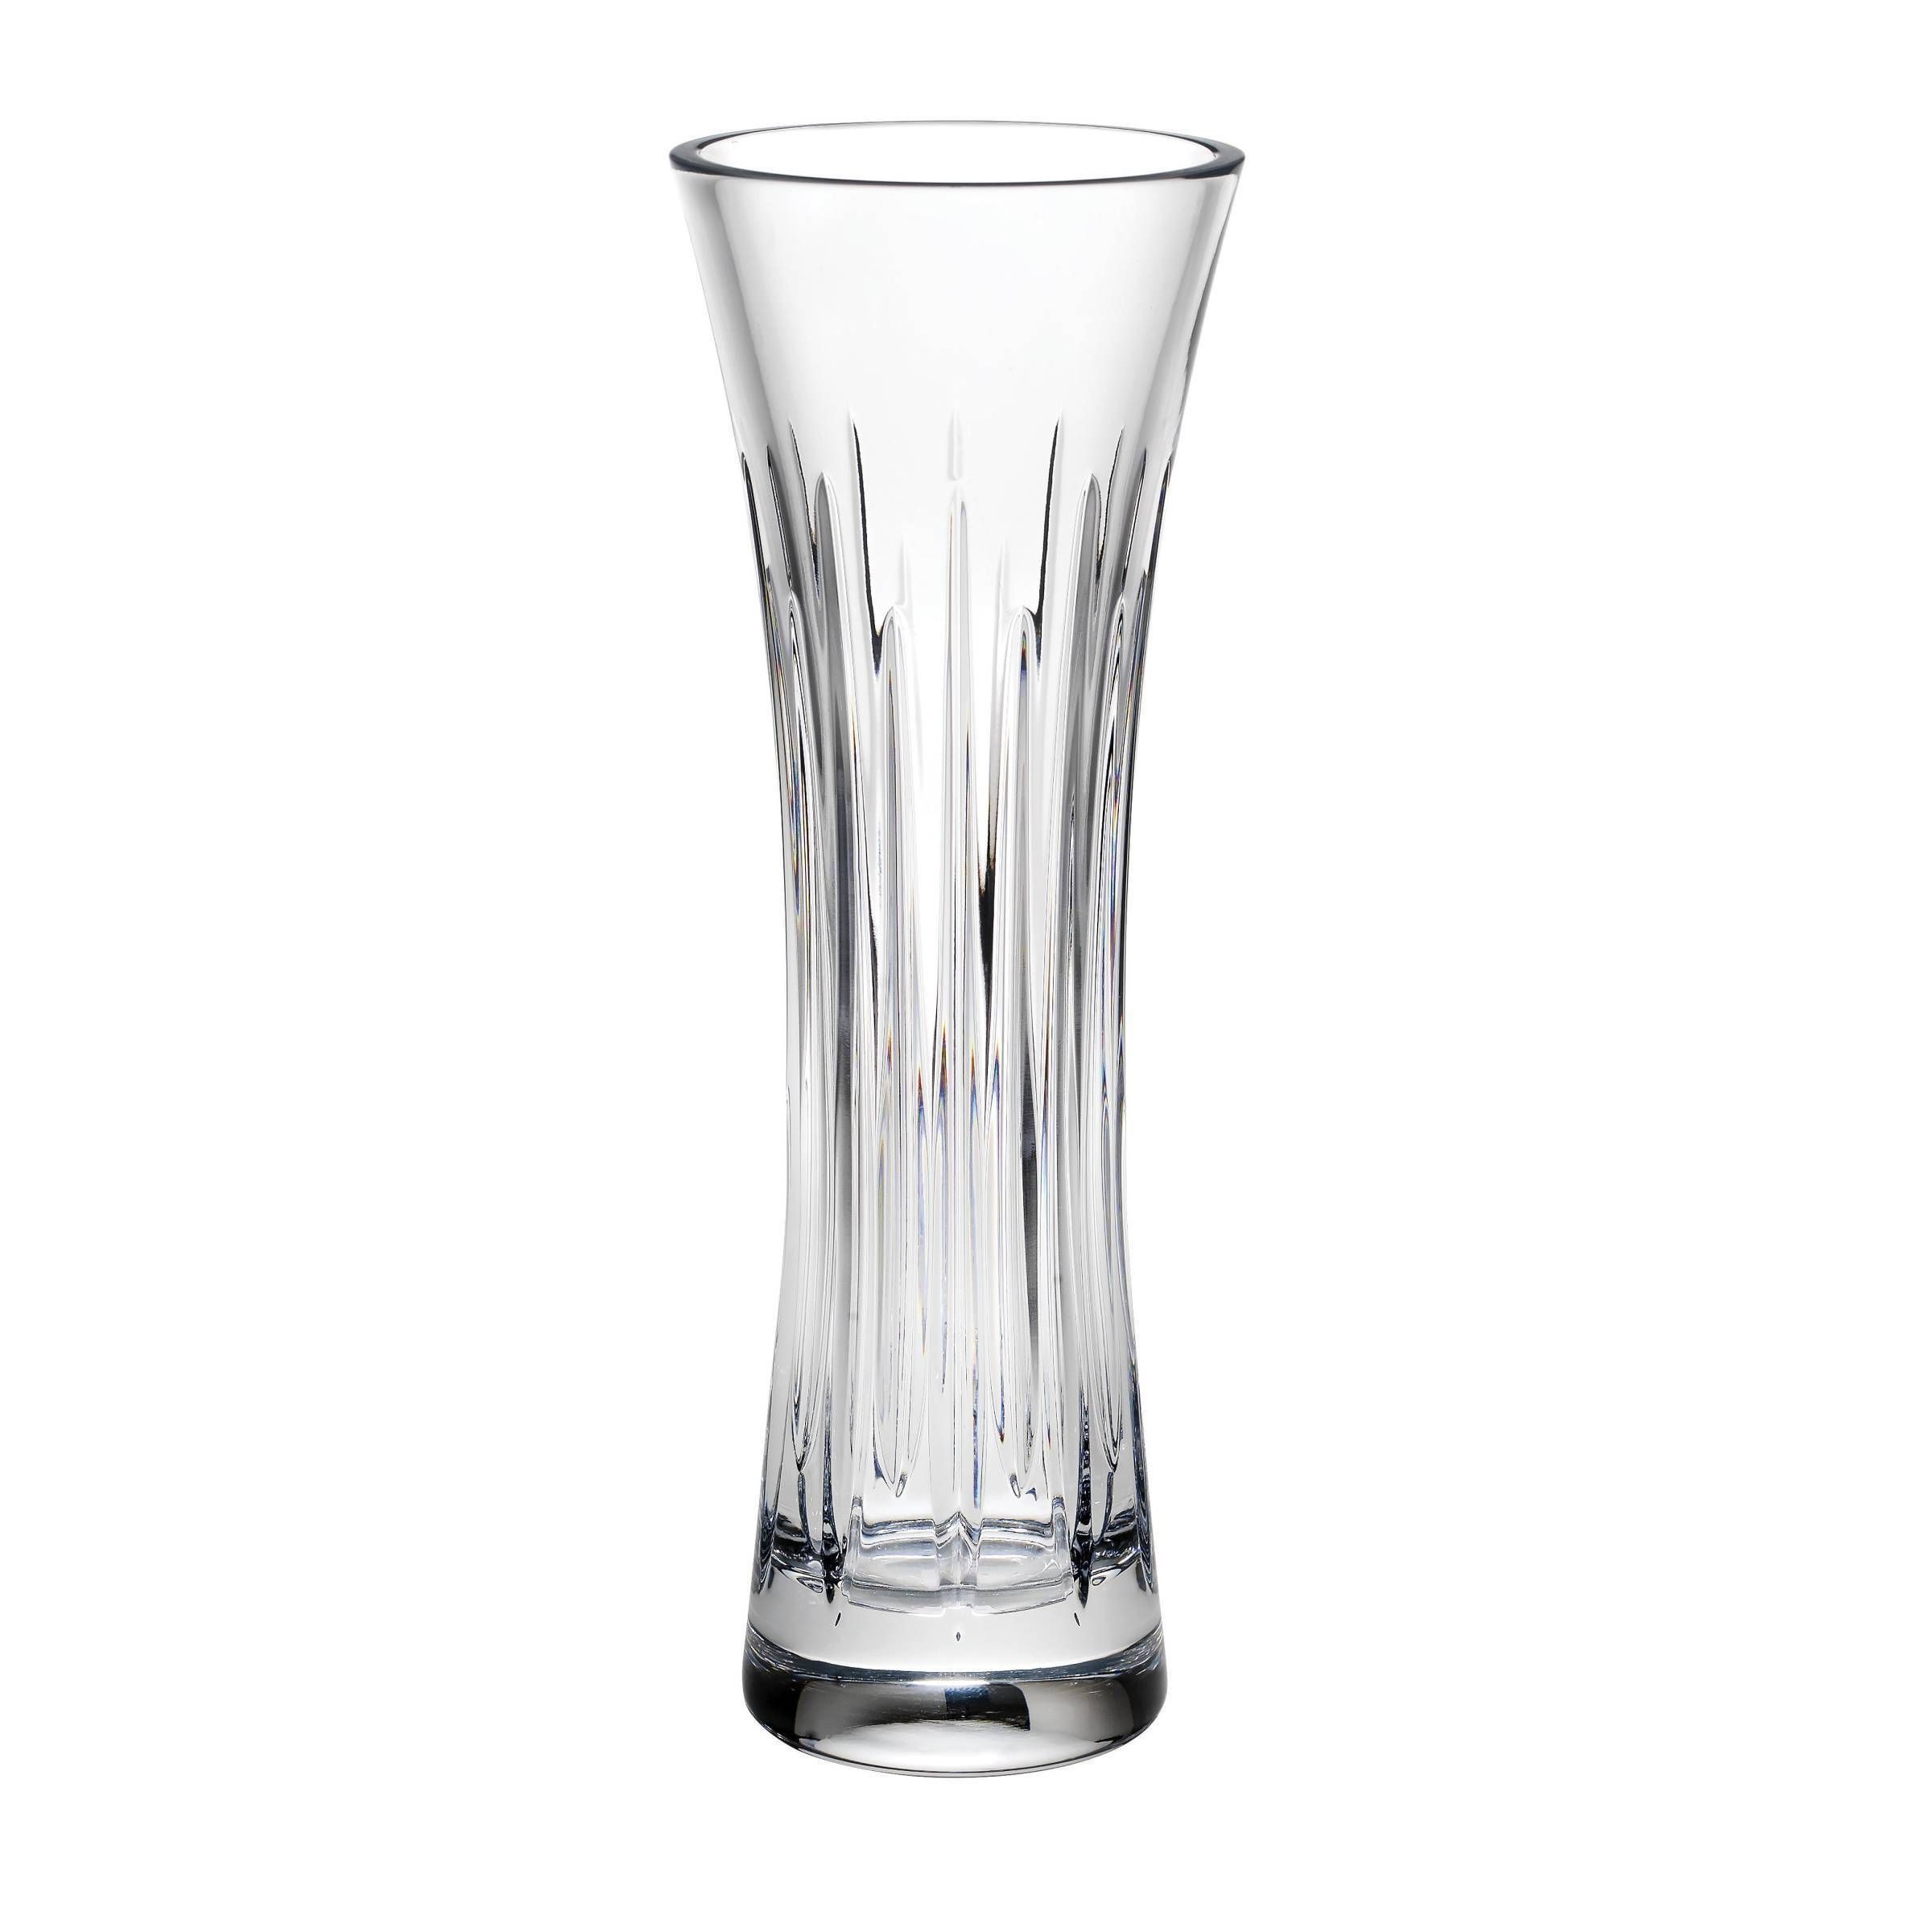 15 attractive Waterford Crystal Lismore Vase 8 2024 free download waterford crystal lismore vase 8 of nachtmann saphir 8 in crystal decorative vase in clear in reed barton soho clear lead crystal 14 inch vase soho size